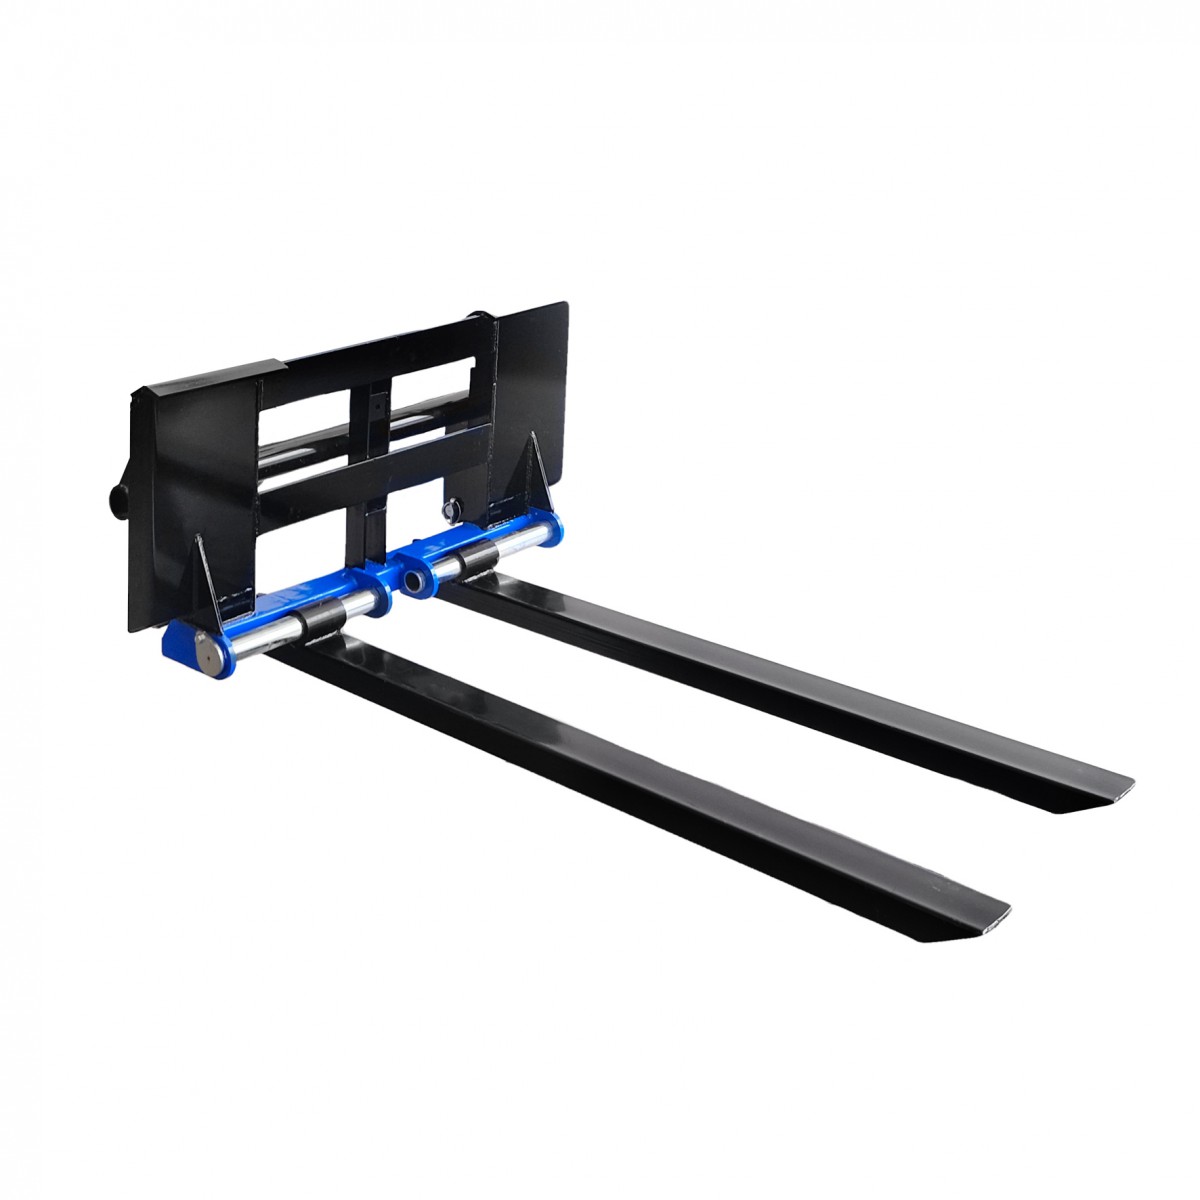 LL2101 120 cm 4FARMER pallet fork for LS Tractor XJ25 tractor